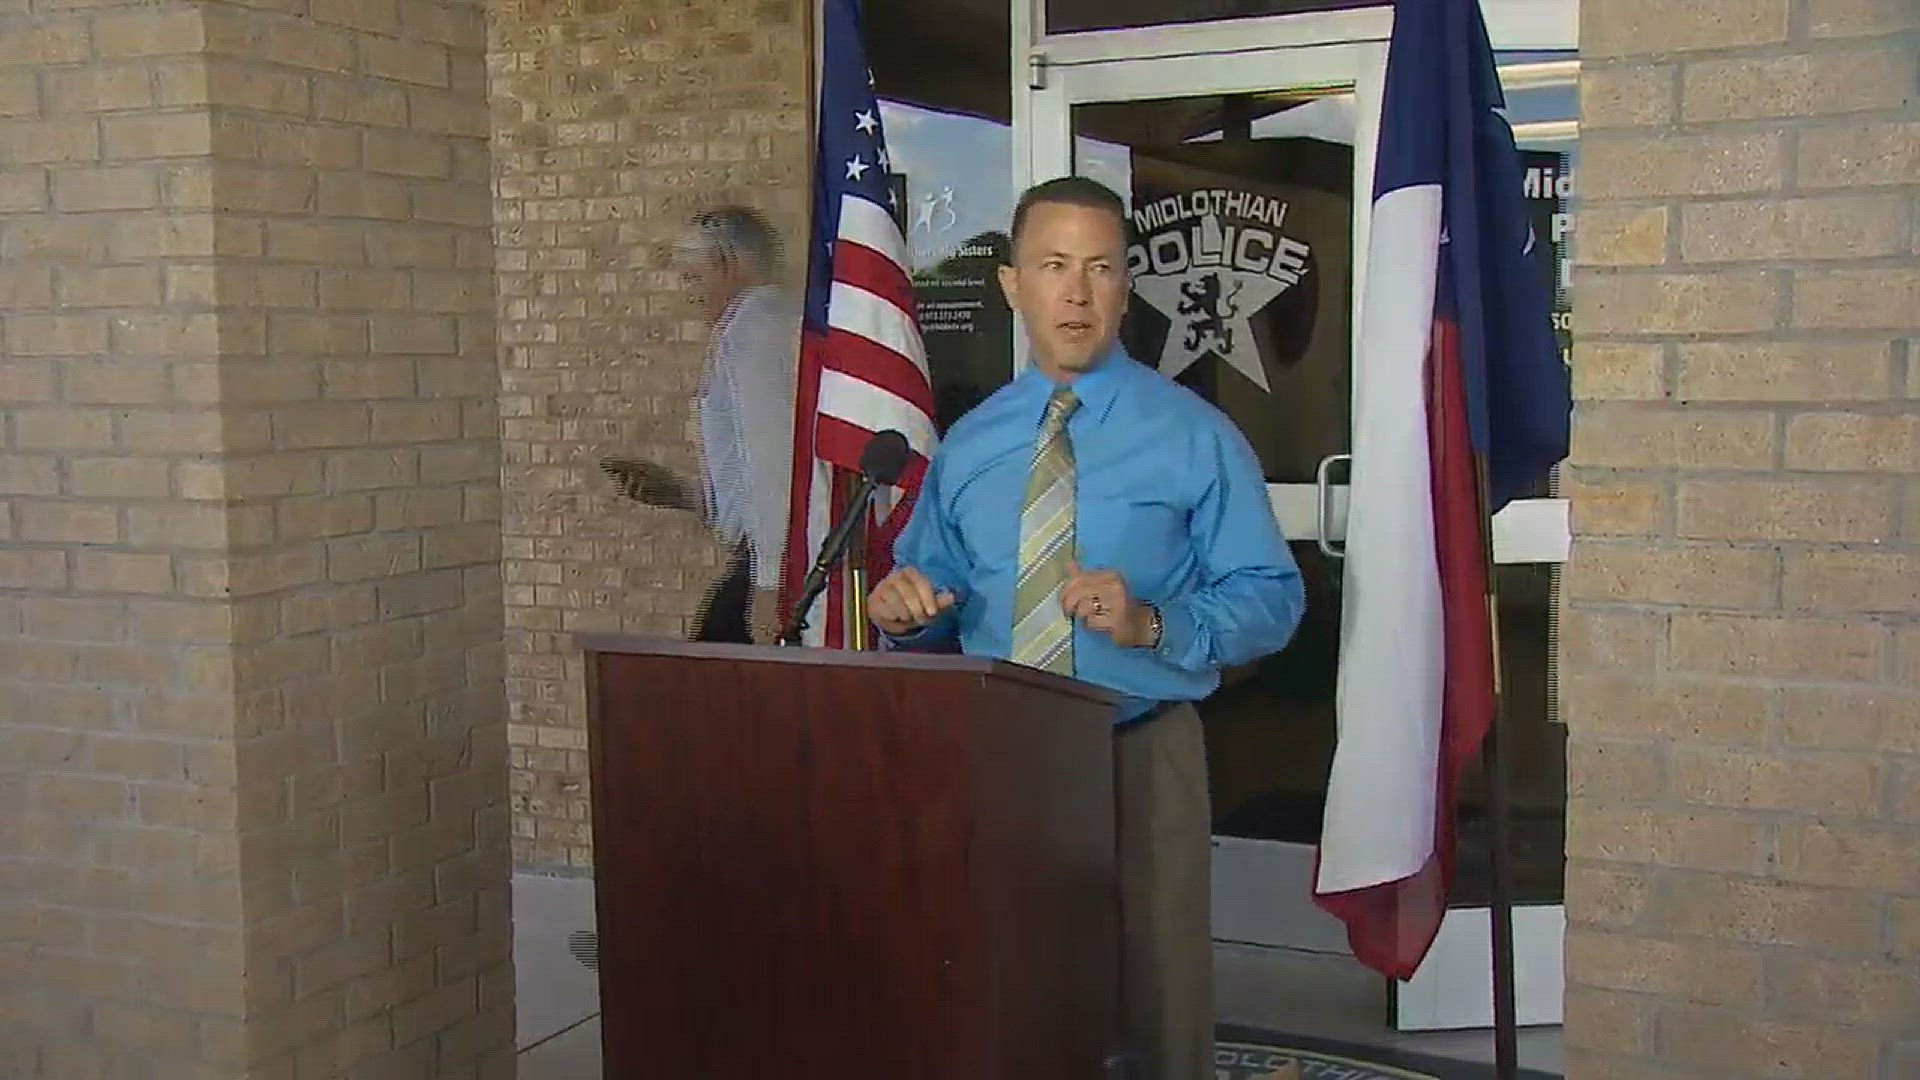 Midlothian Police provide an update on the mysterious murder of Missy Bevers.